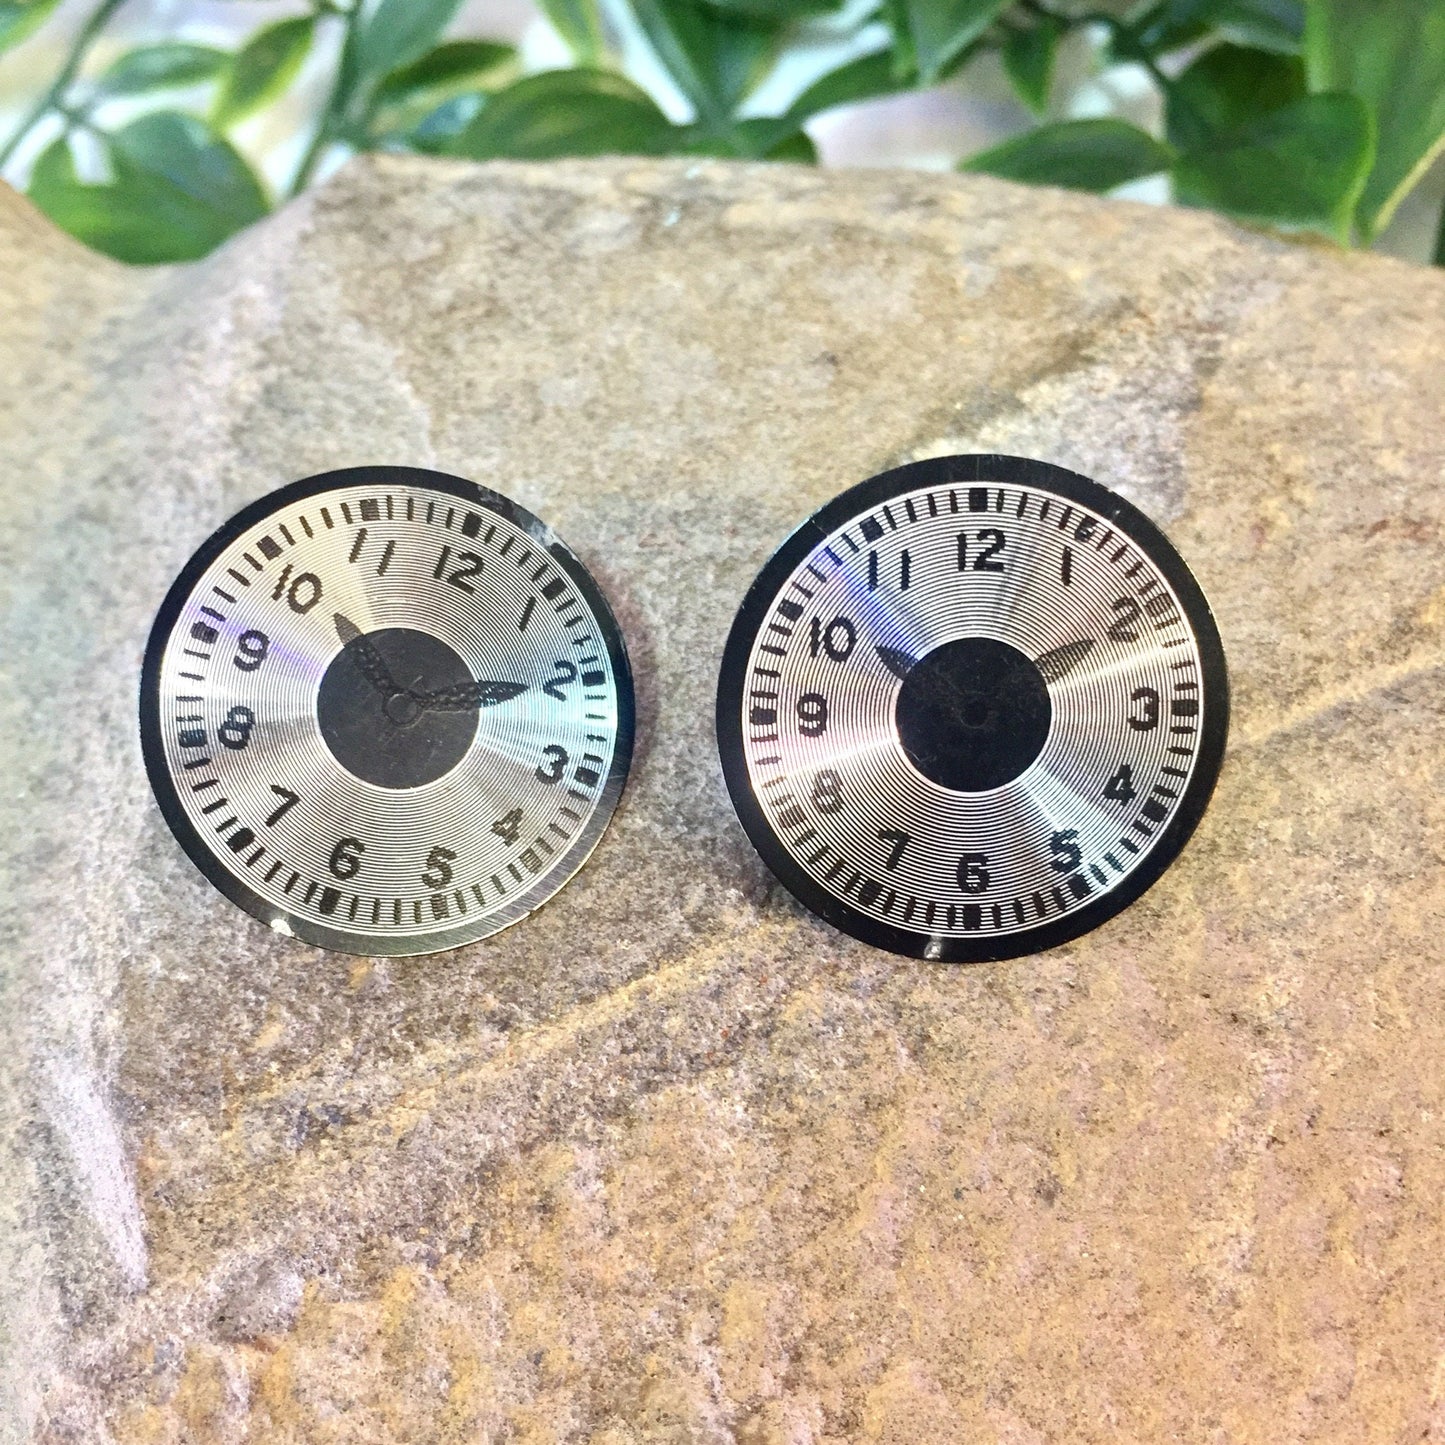 Vintage clock face disc earrings on stone surface with green leaves in background